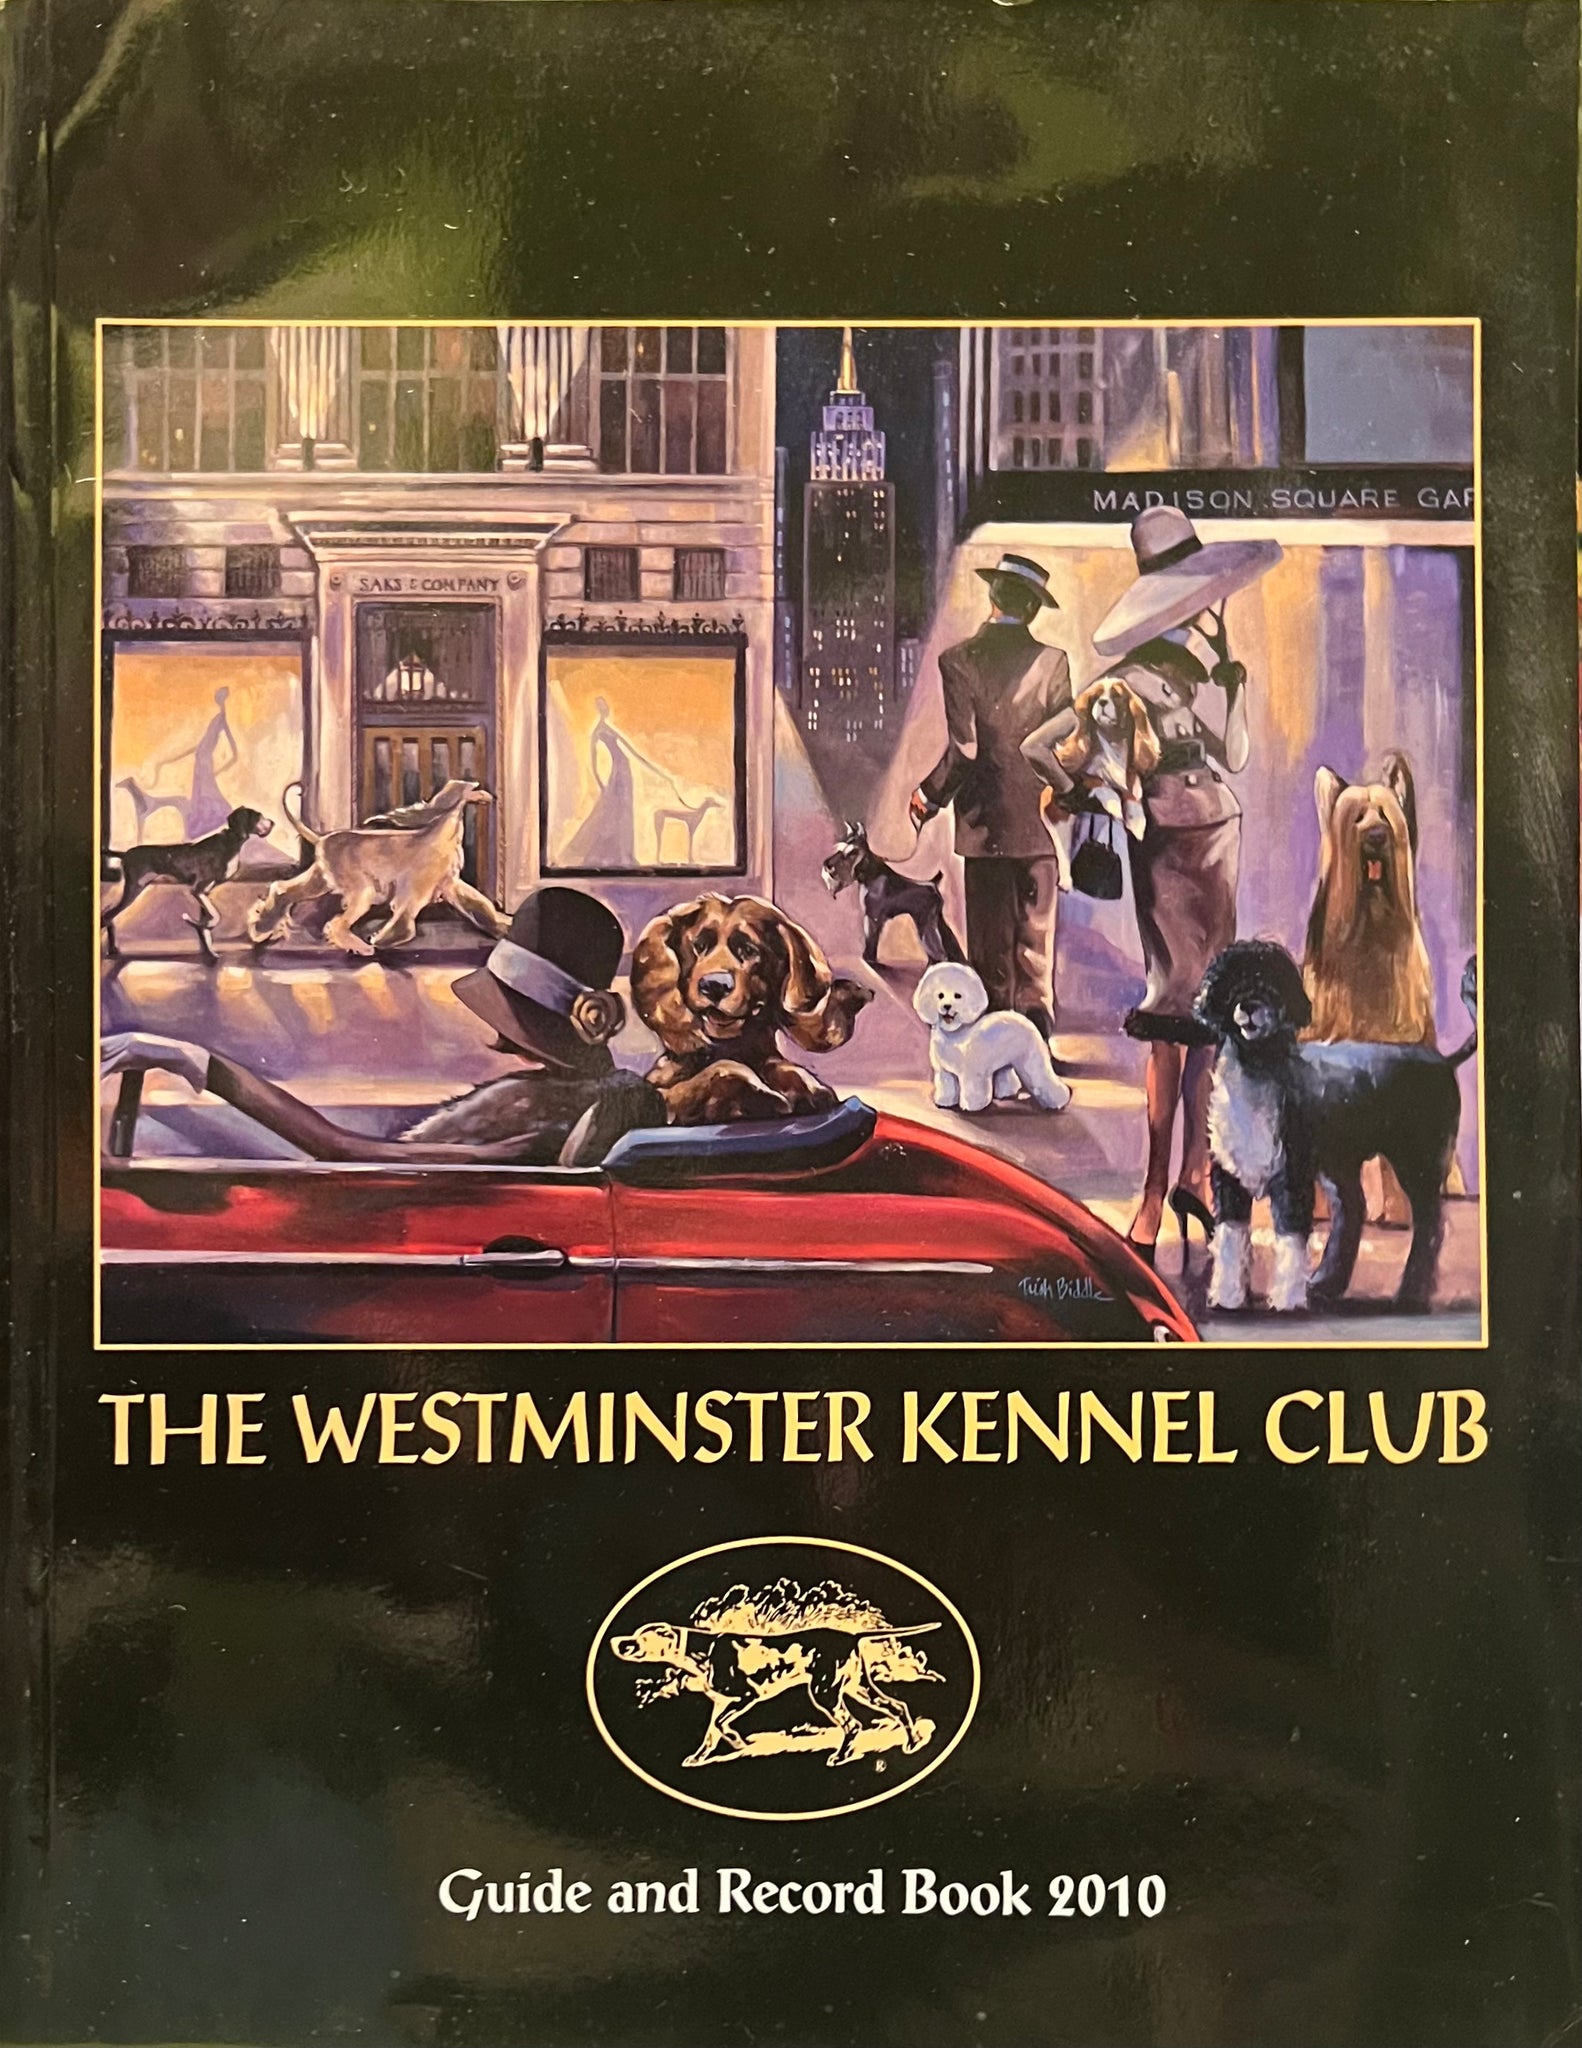 The Westminster Kennel Club: Guide and Record Book 2010